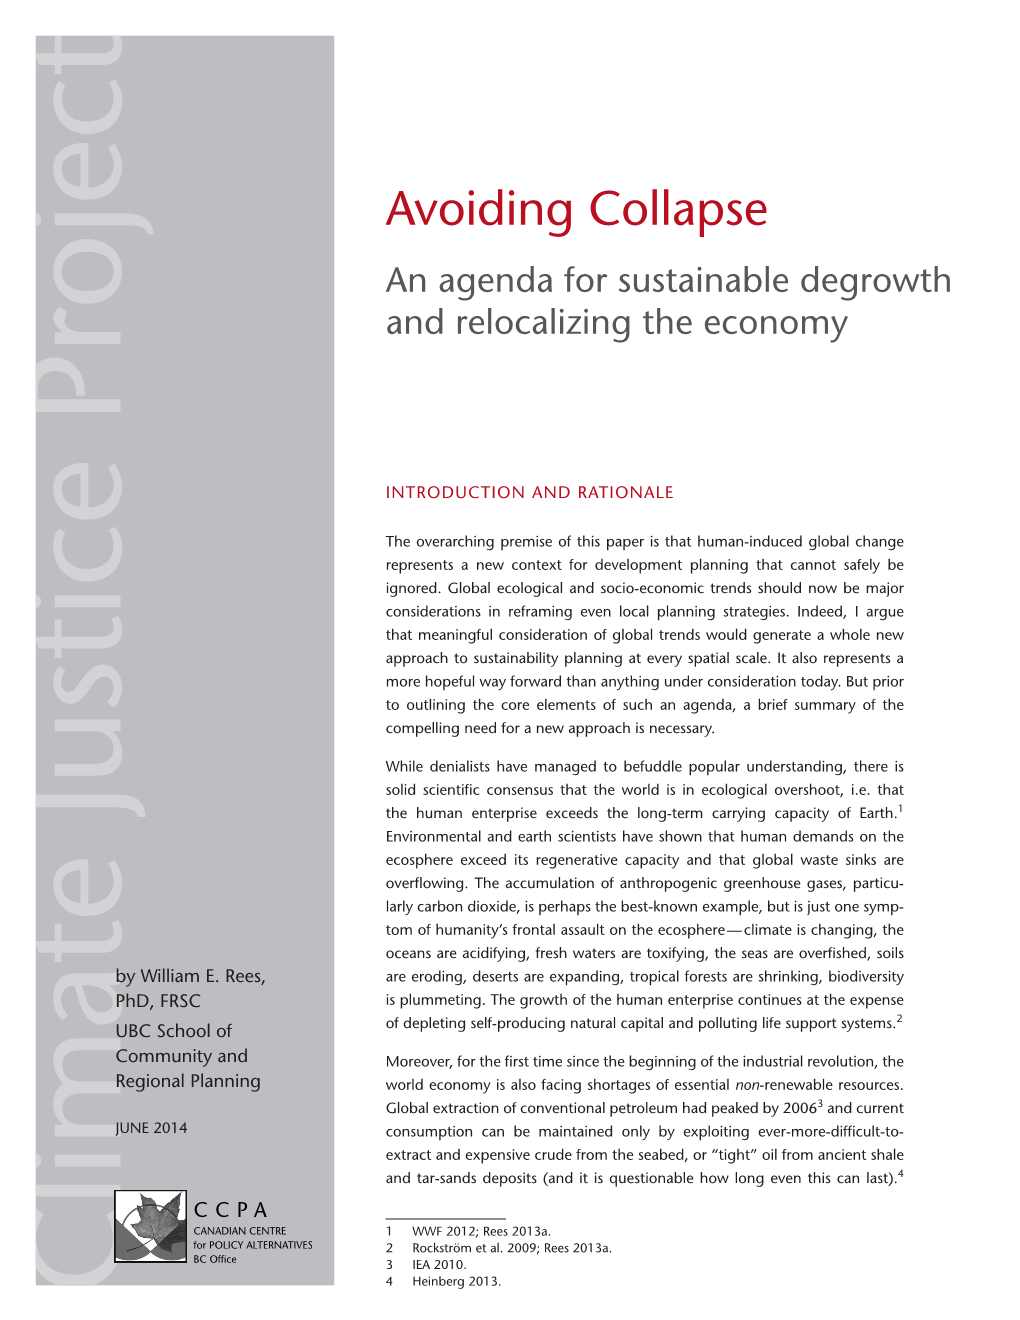 Avoiding Collapse an Agenda for Sustainable Degrowth and Relocalizing the Economy